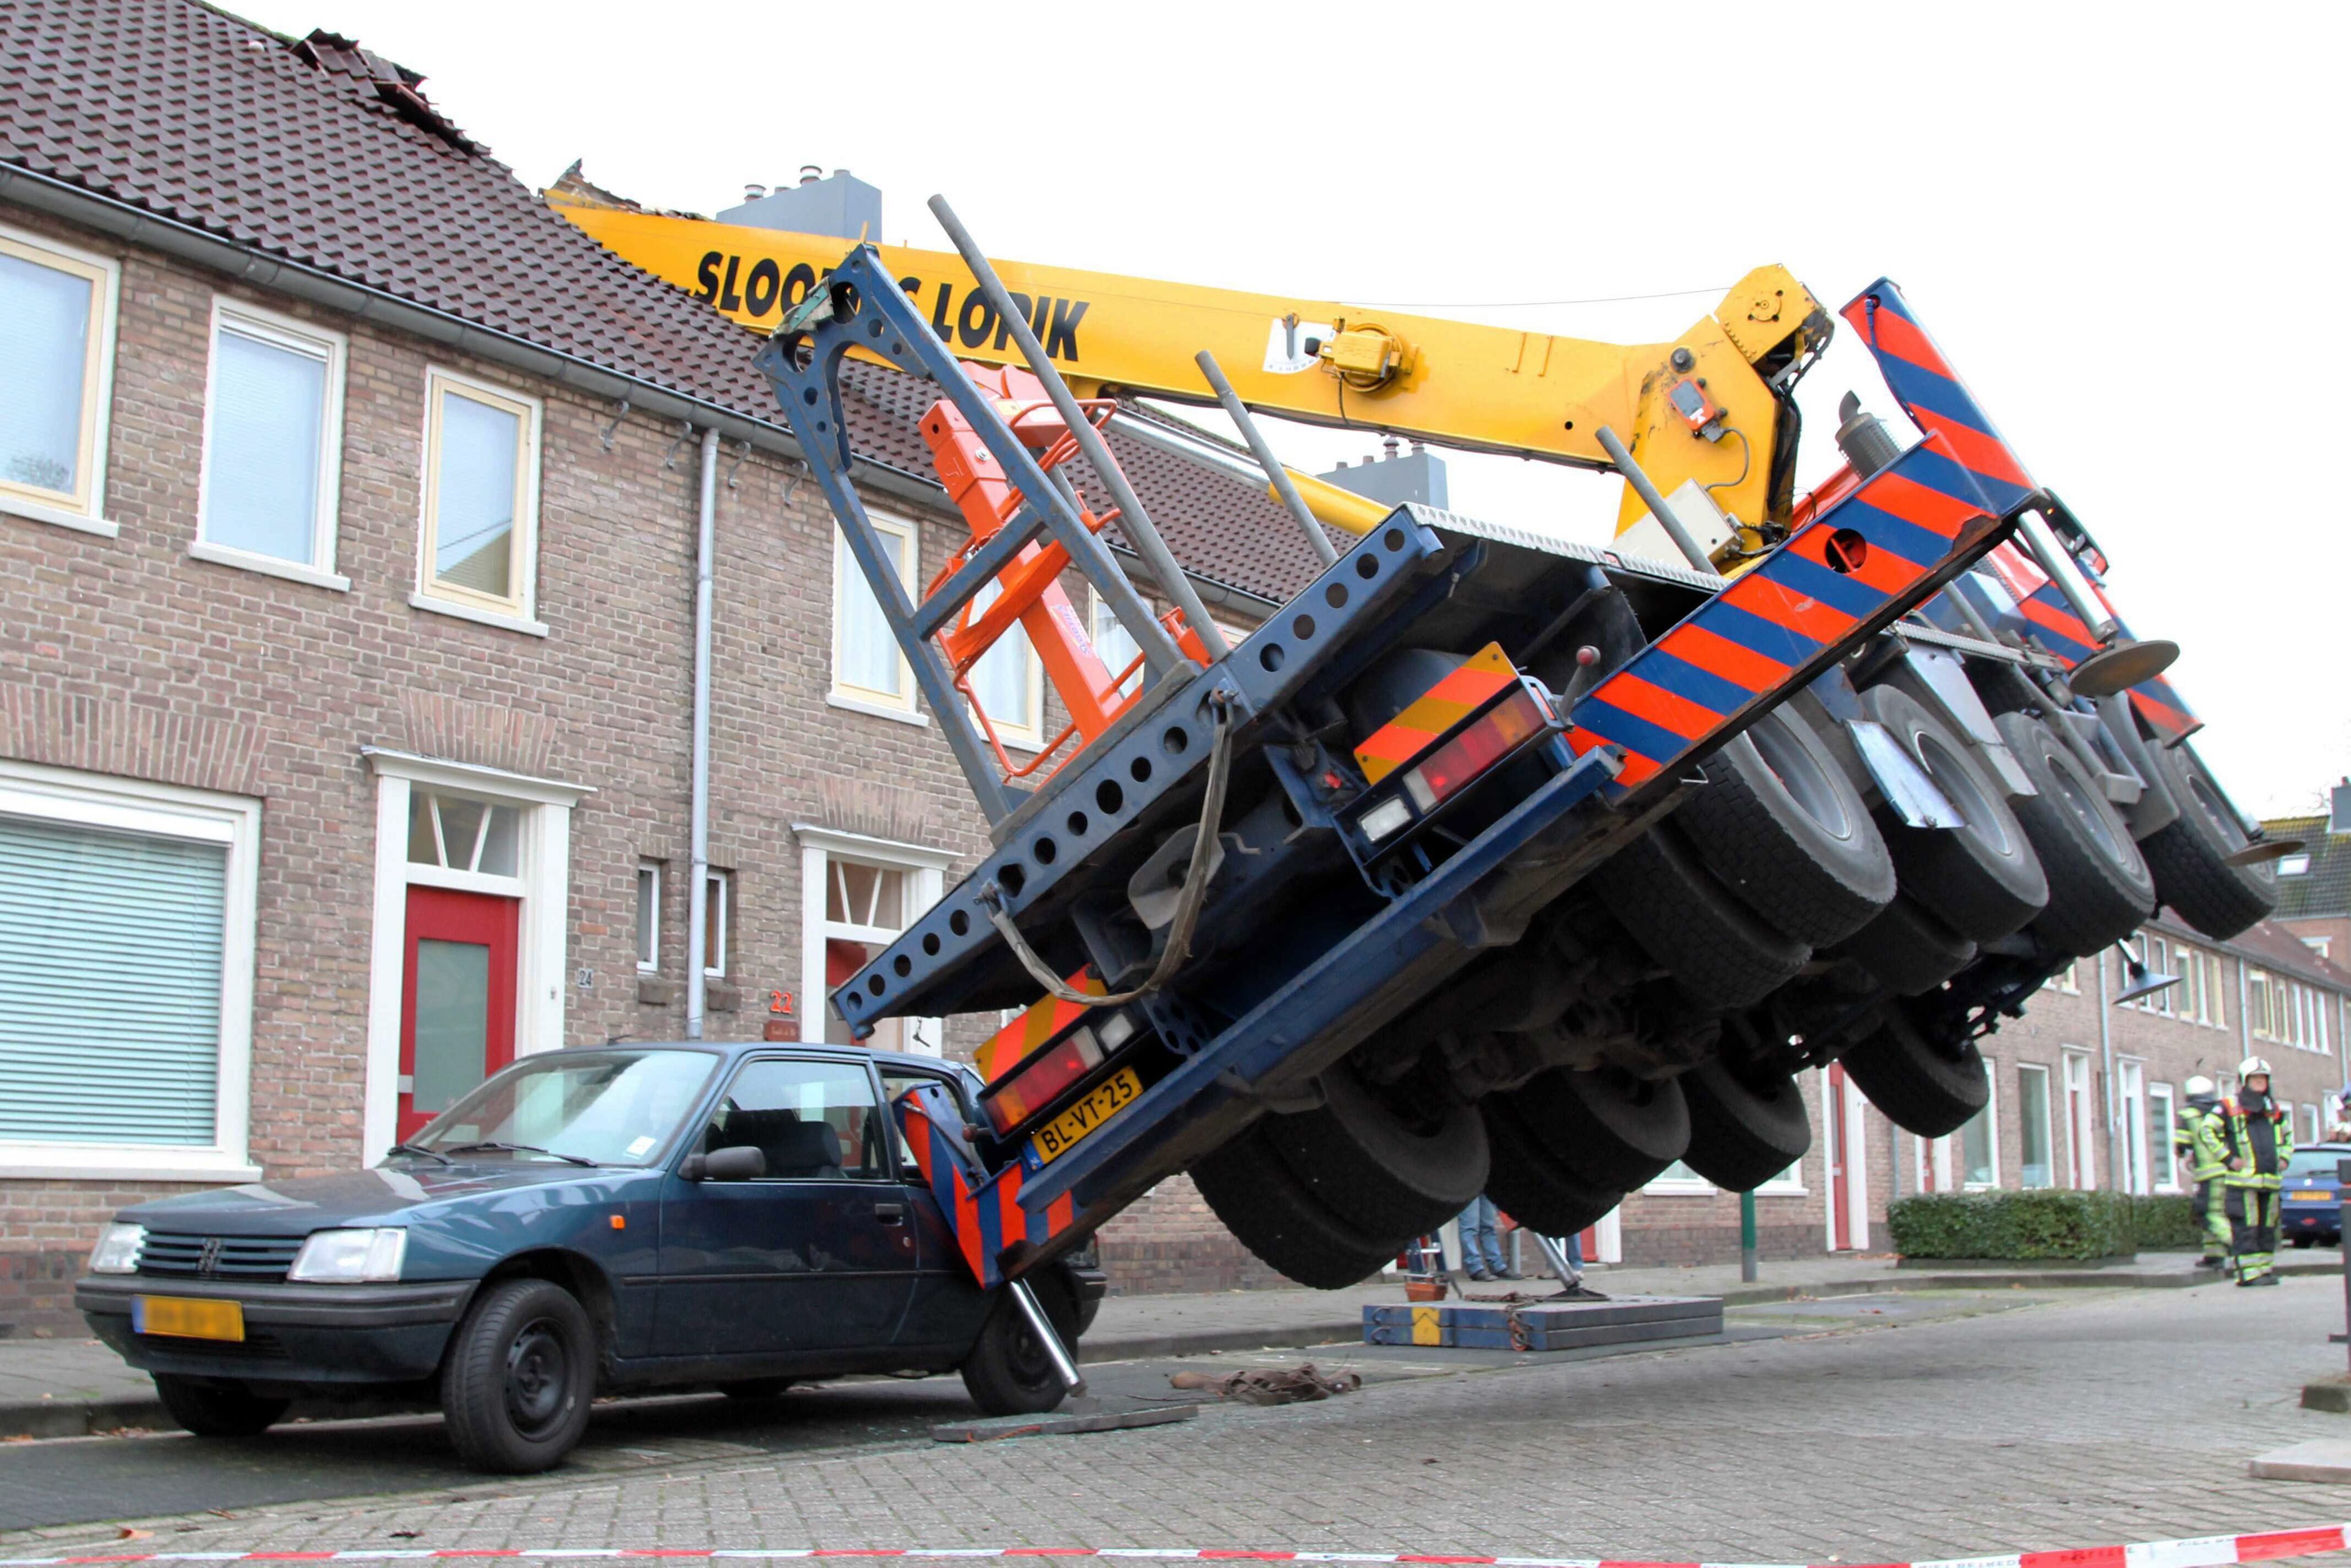 Crane topples on to house during dramatic proposal